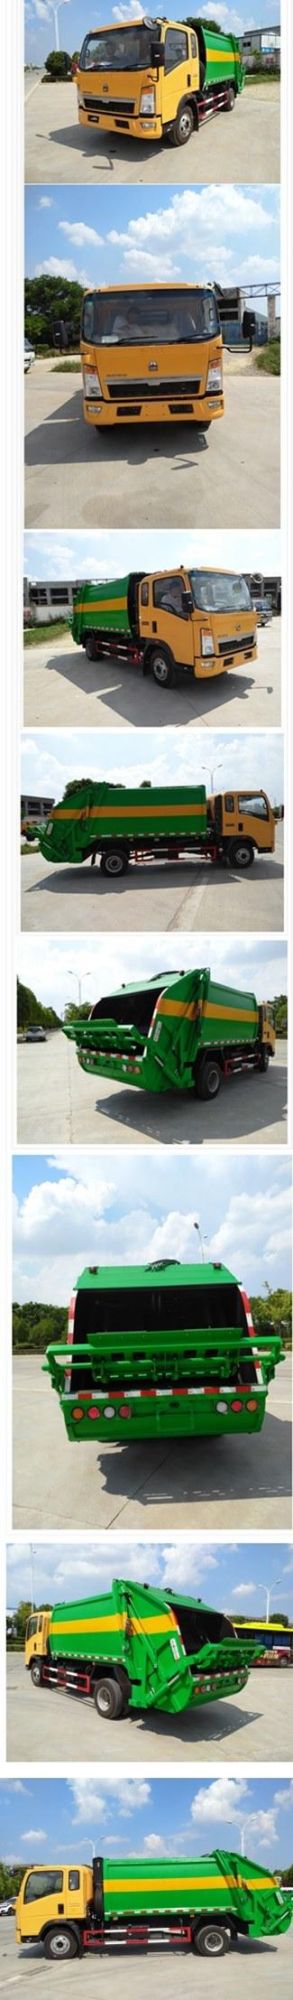 Used HOWO 16m3 16 Cubic Meters Waste Collection Trucks on Sale